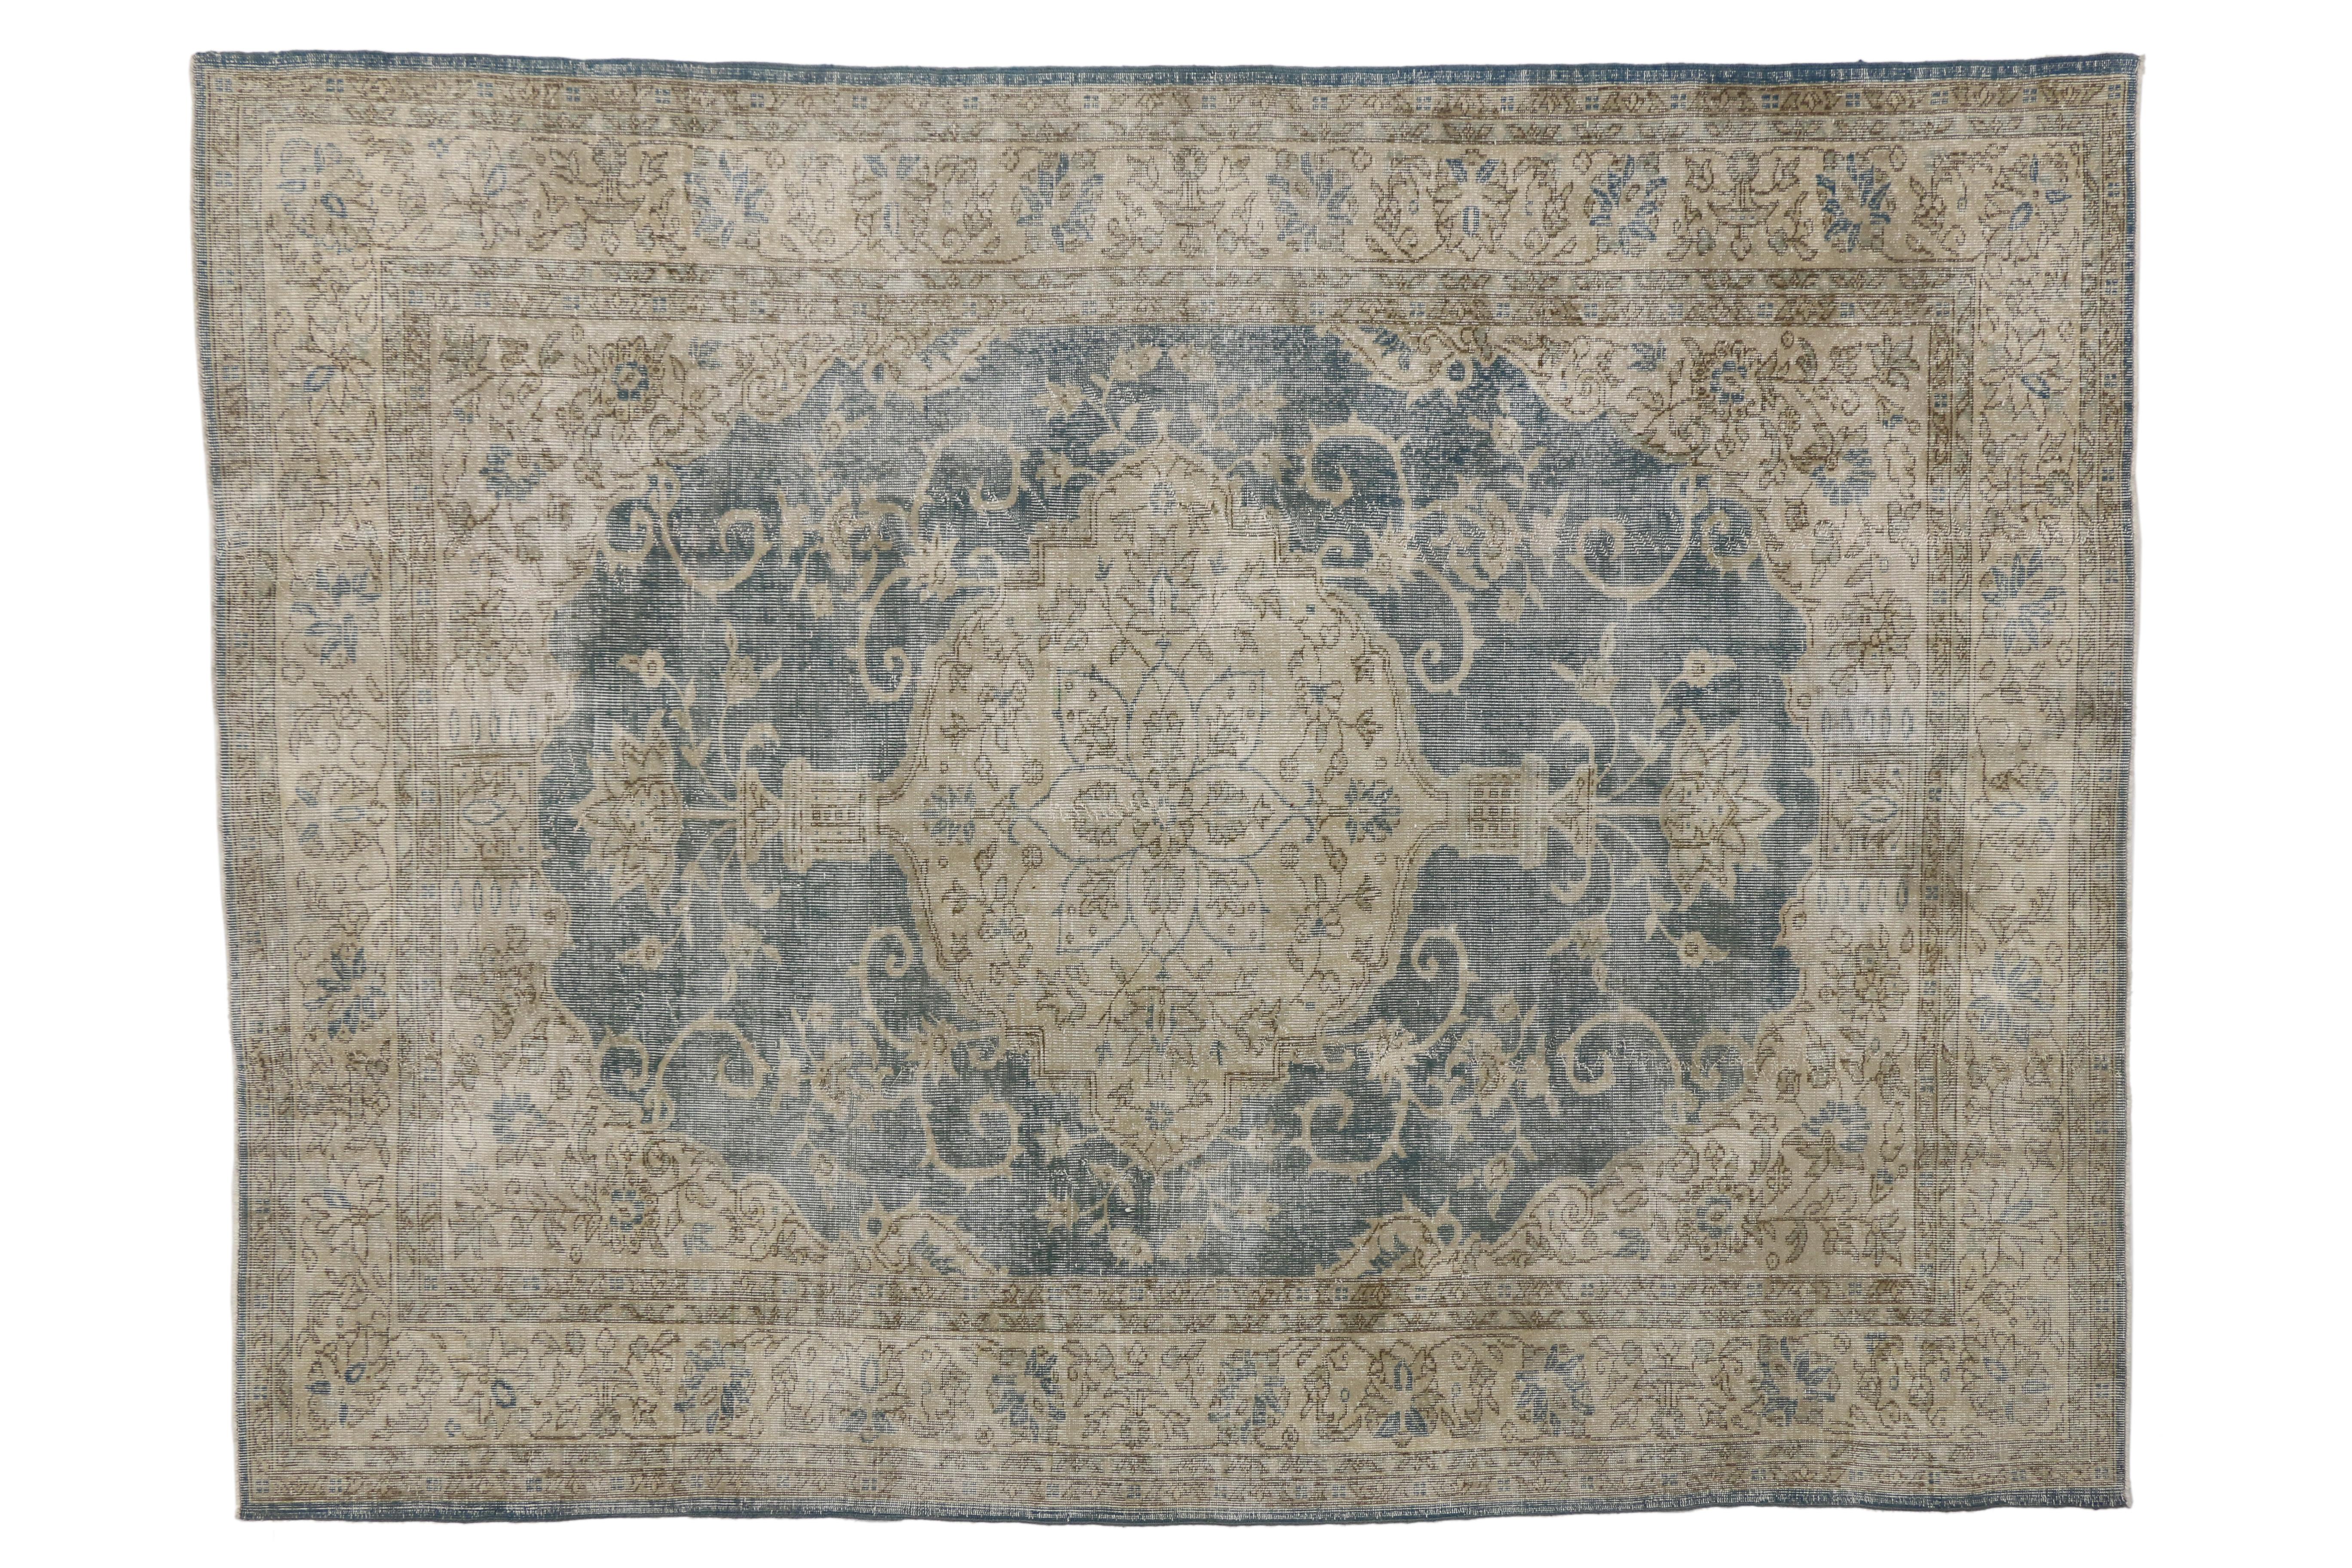 Hand-Knotted Distressed Vintage Turkish Sivas Rug with Shabby Chic Farmhouse Style